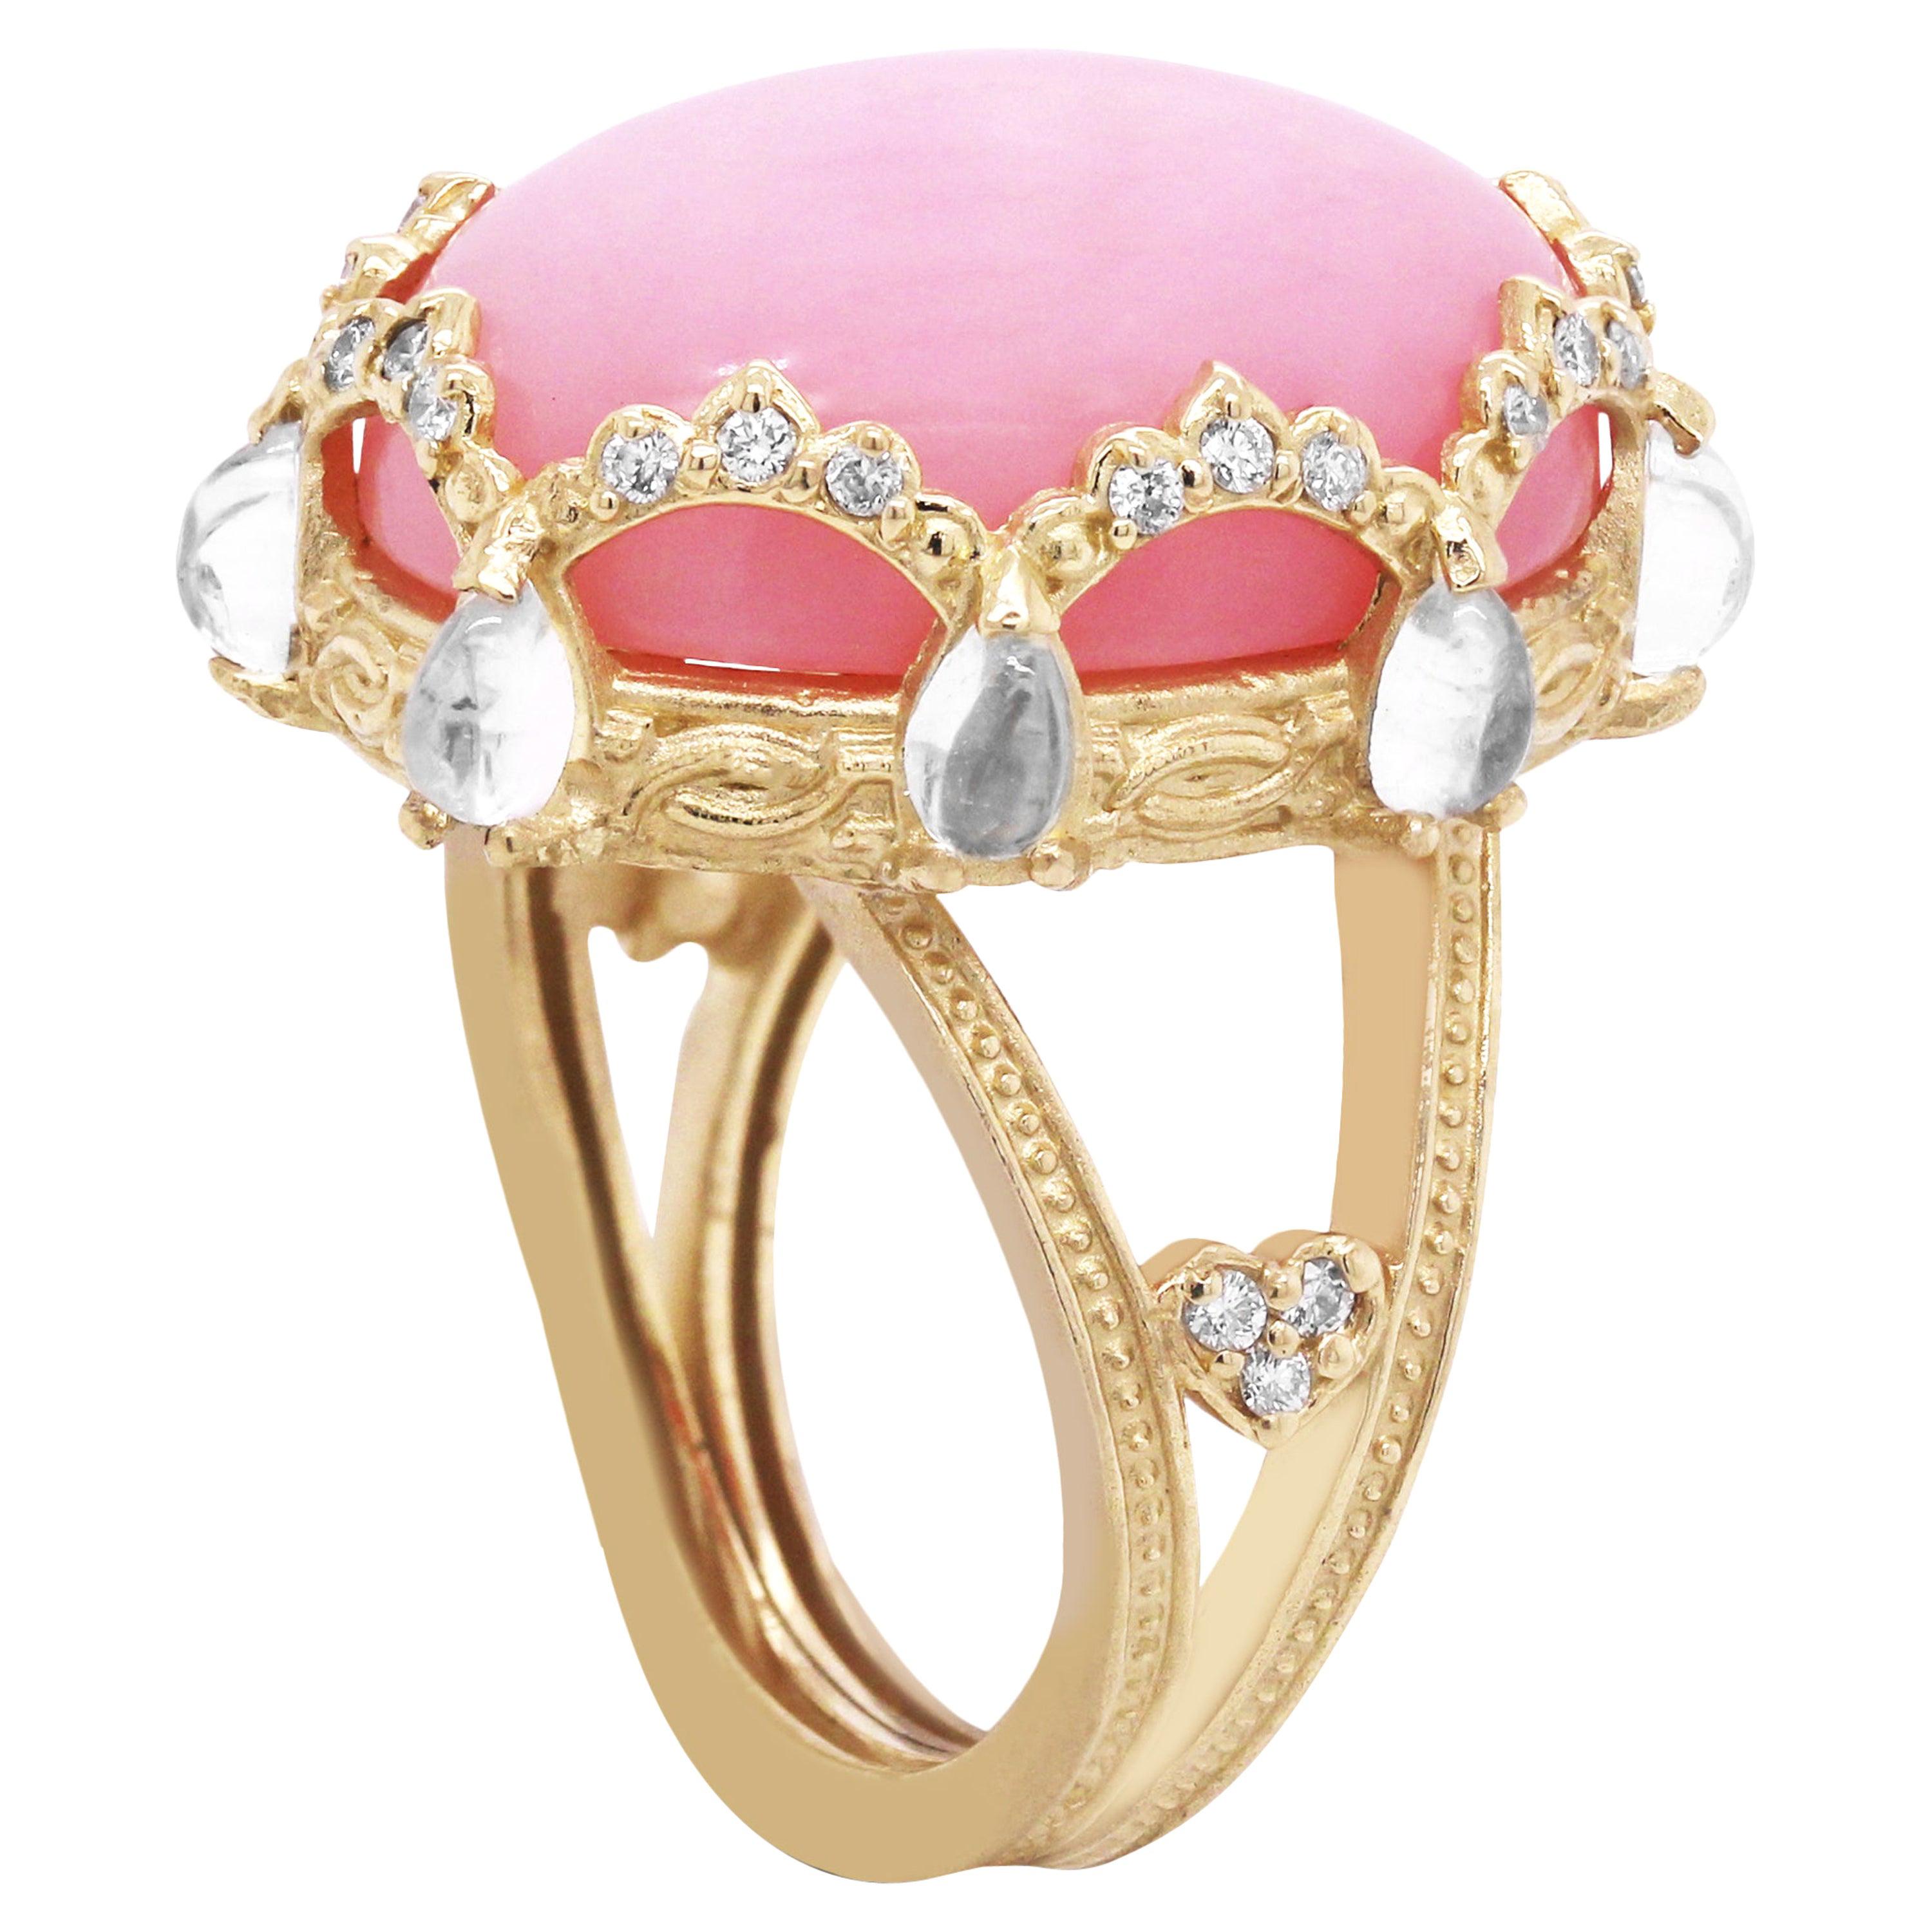 Peruvian Pink Opal Diamond Gold Oval Ring with Rainbow Moonstones